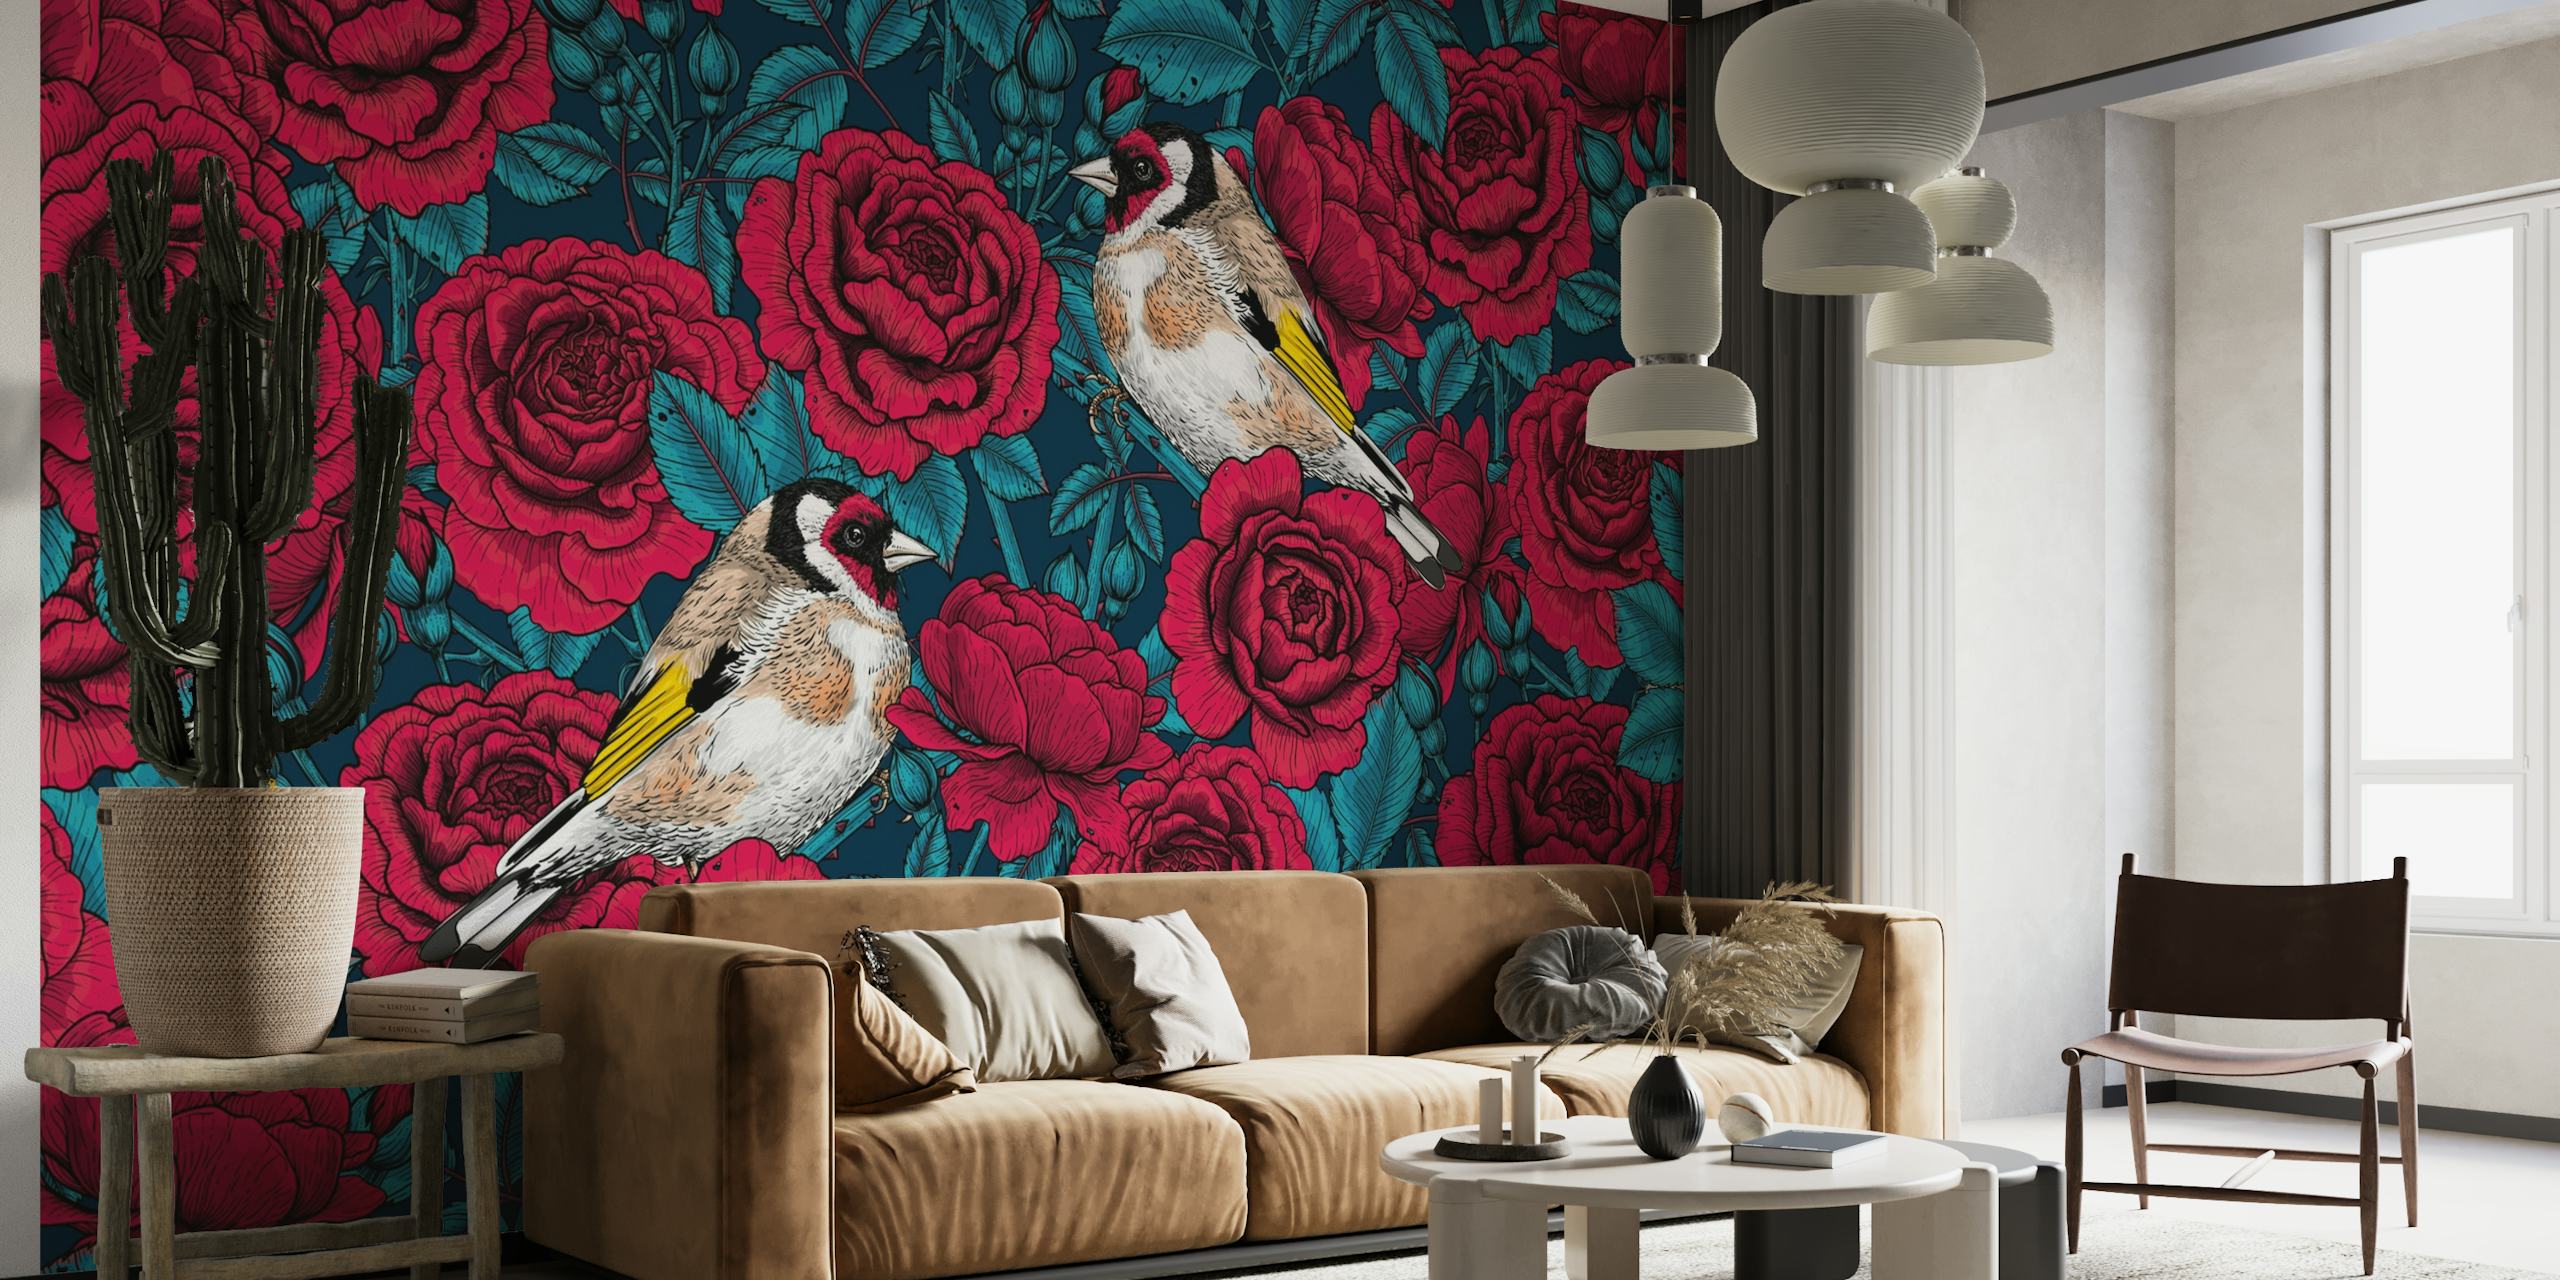 Red roses and birds papel pintado